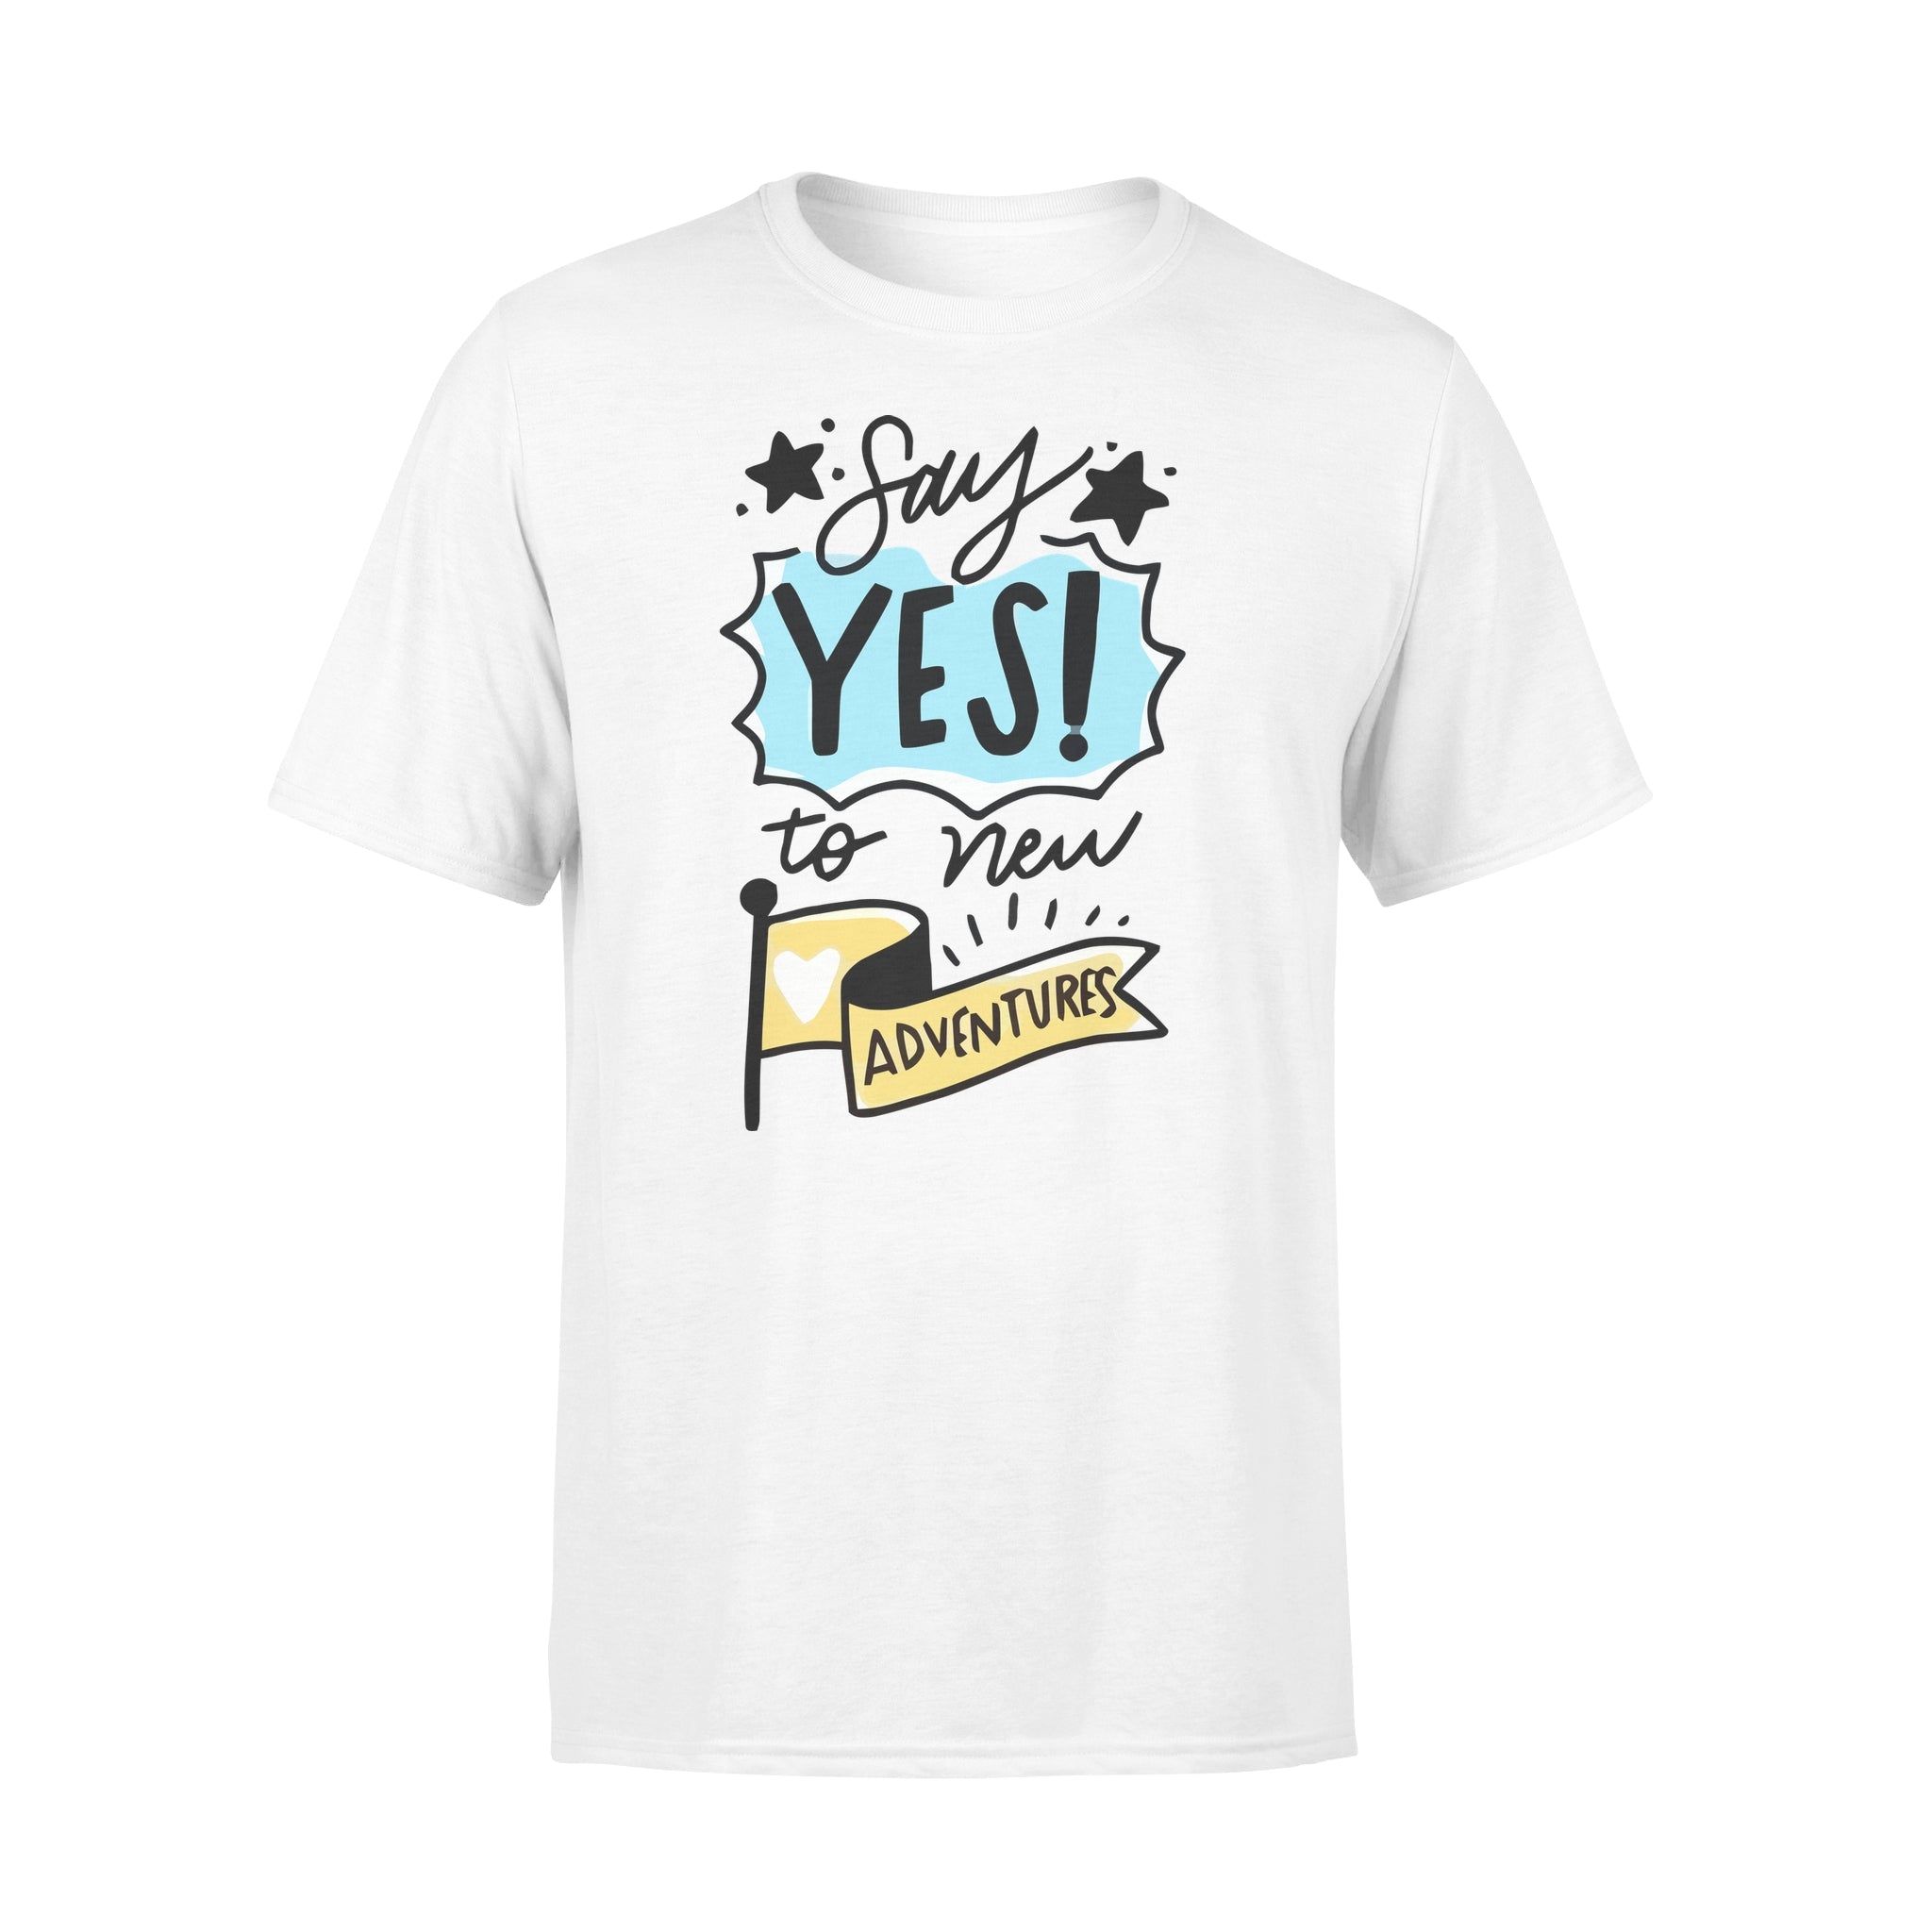 Say Yes To New Adventures -  T-shirt